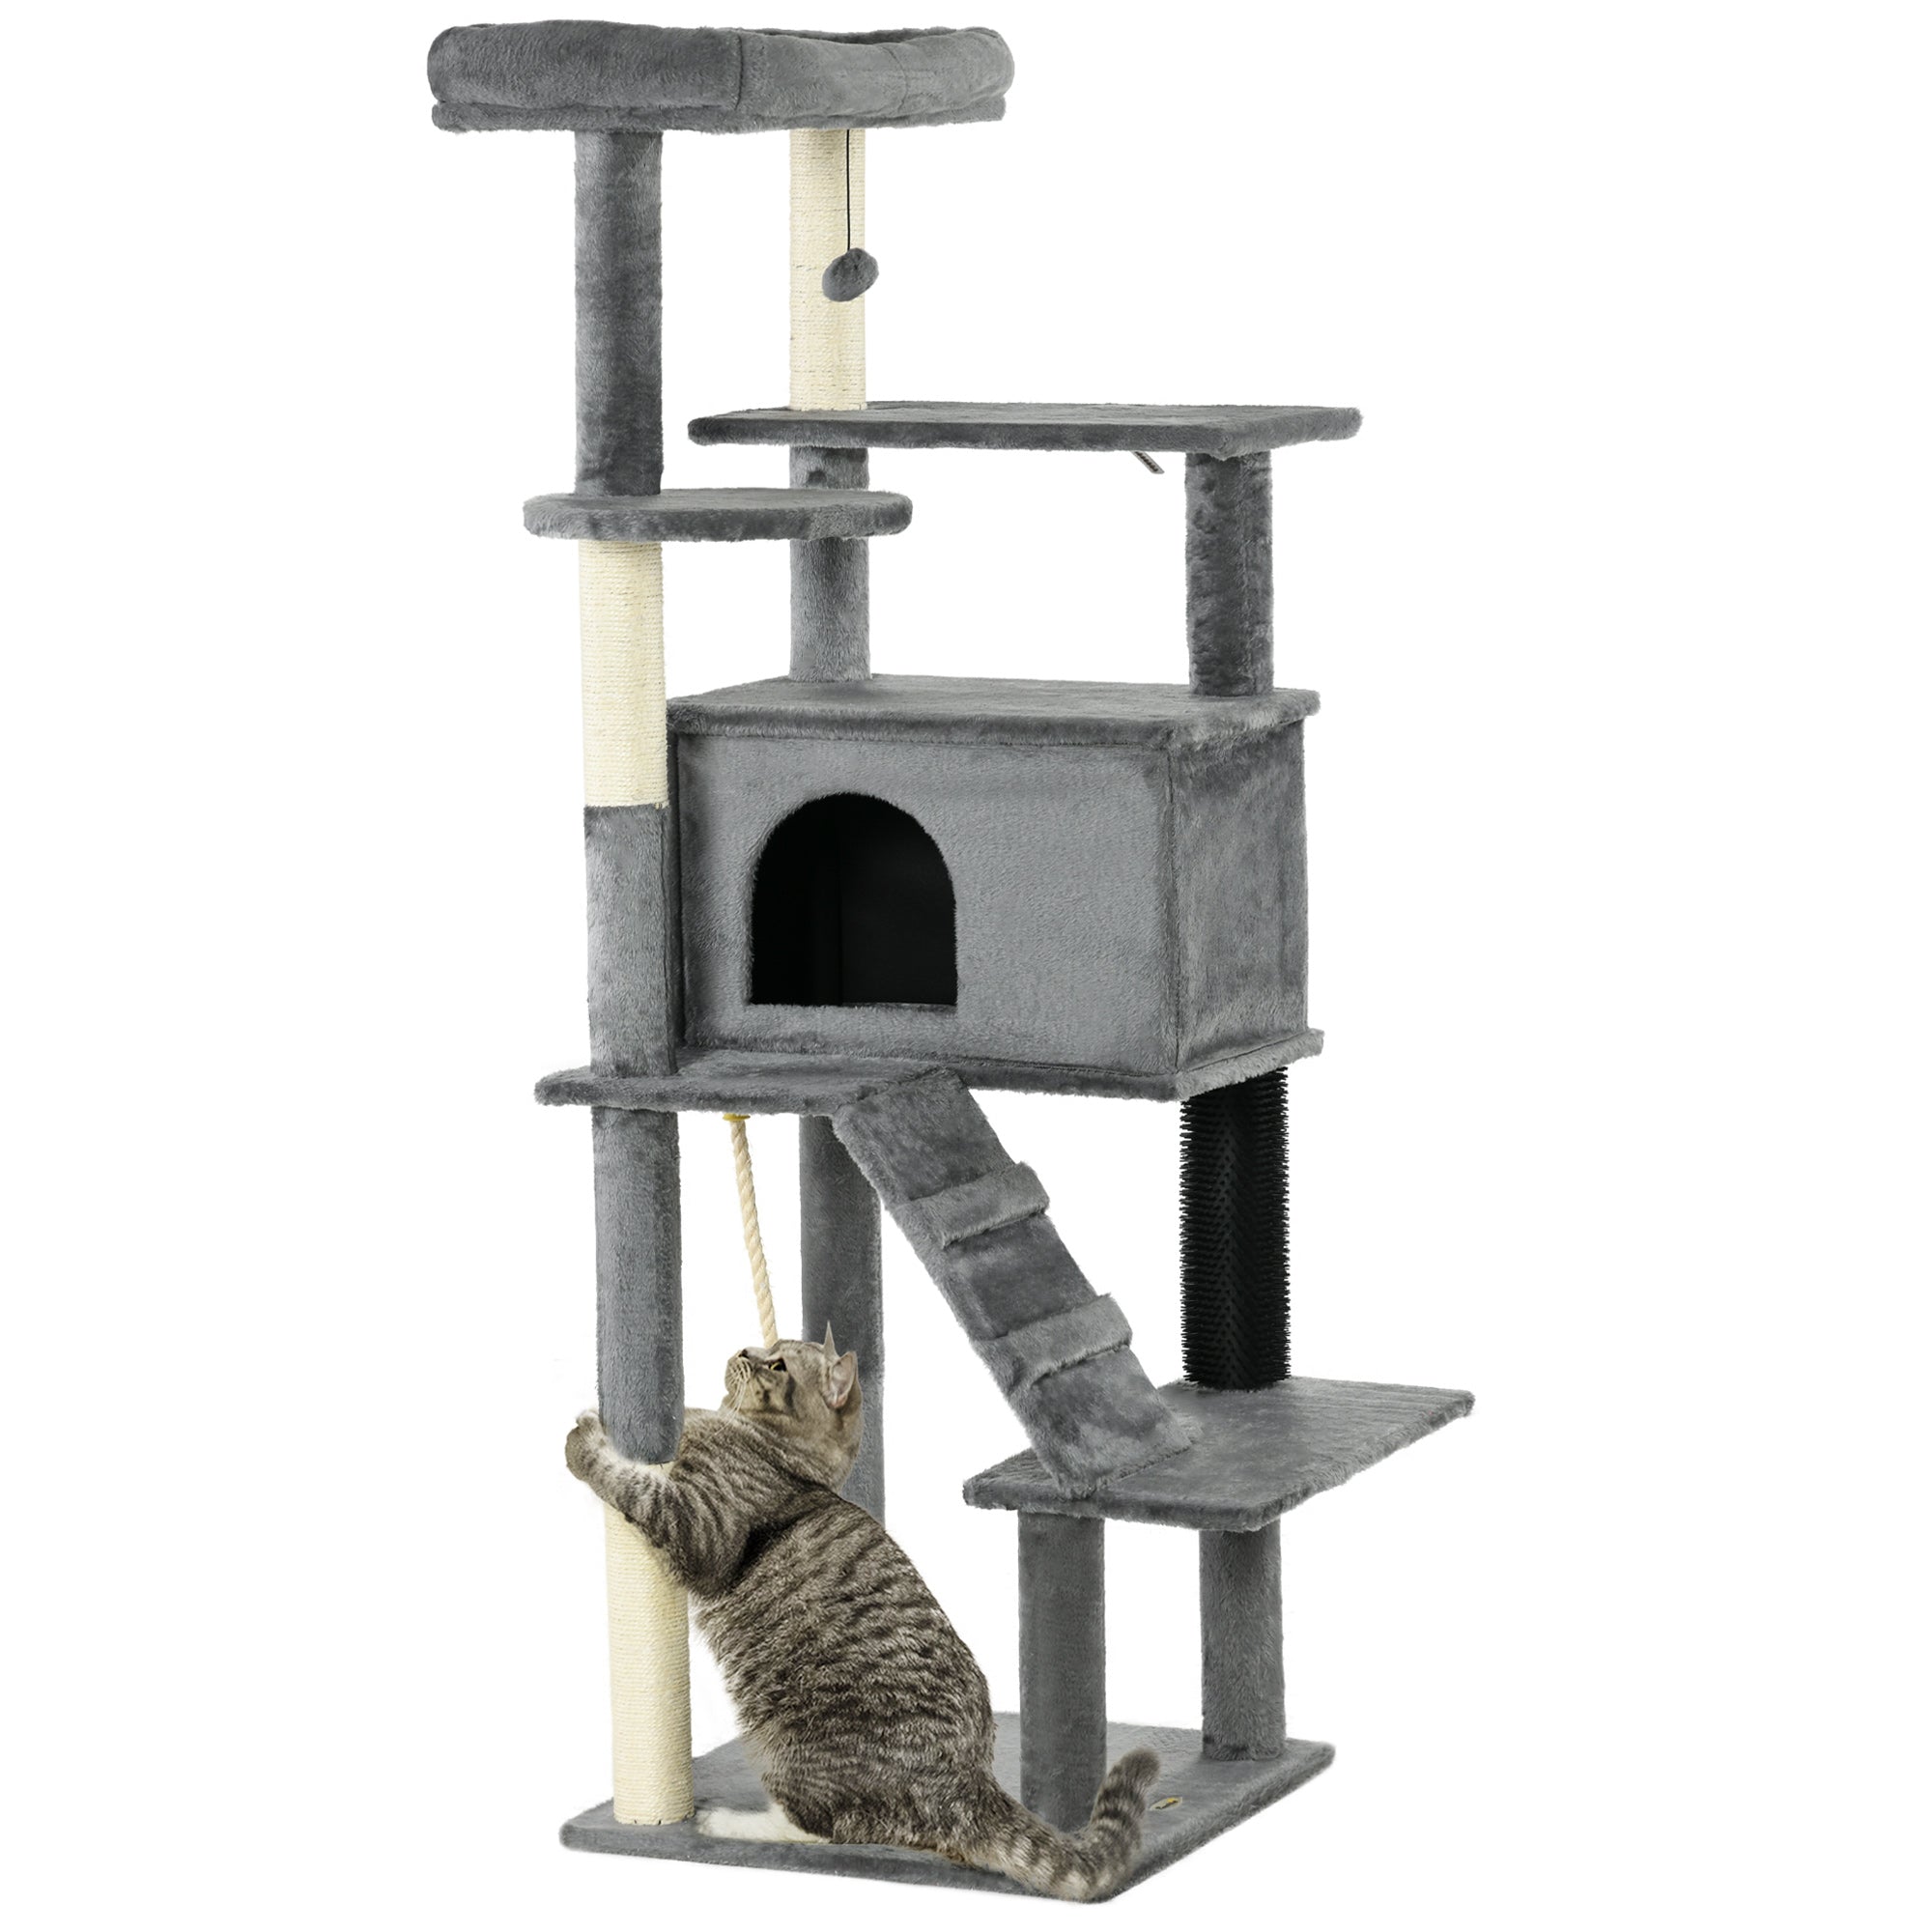 Cat Tree for Large Cats Adult, 58" Tall Cat Tree with Scratching Posts, Large Cat Tower for Indoor Cats with Bed, House, Toys, Grey - Gallery Canada